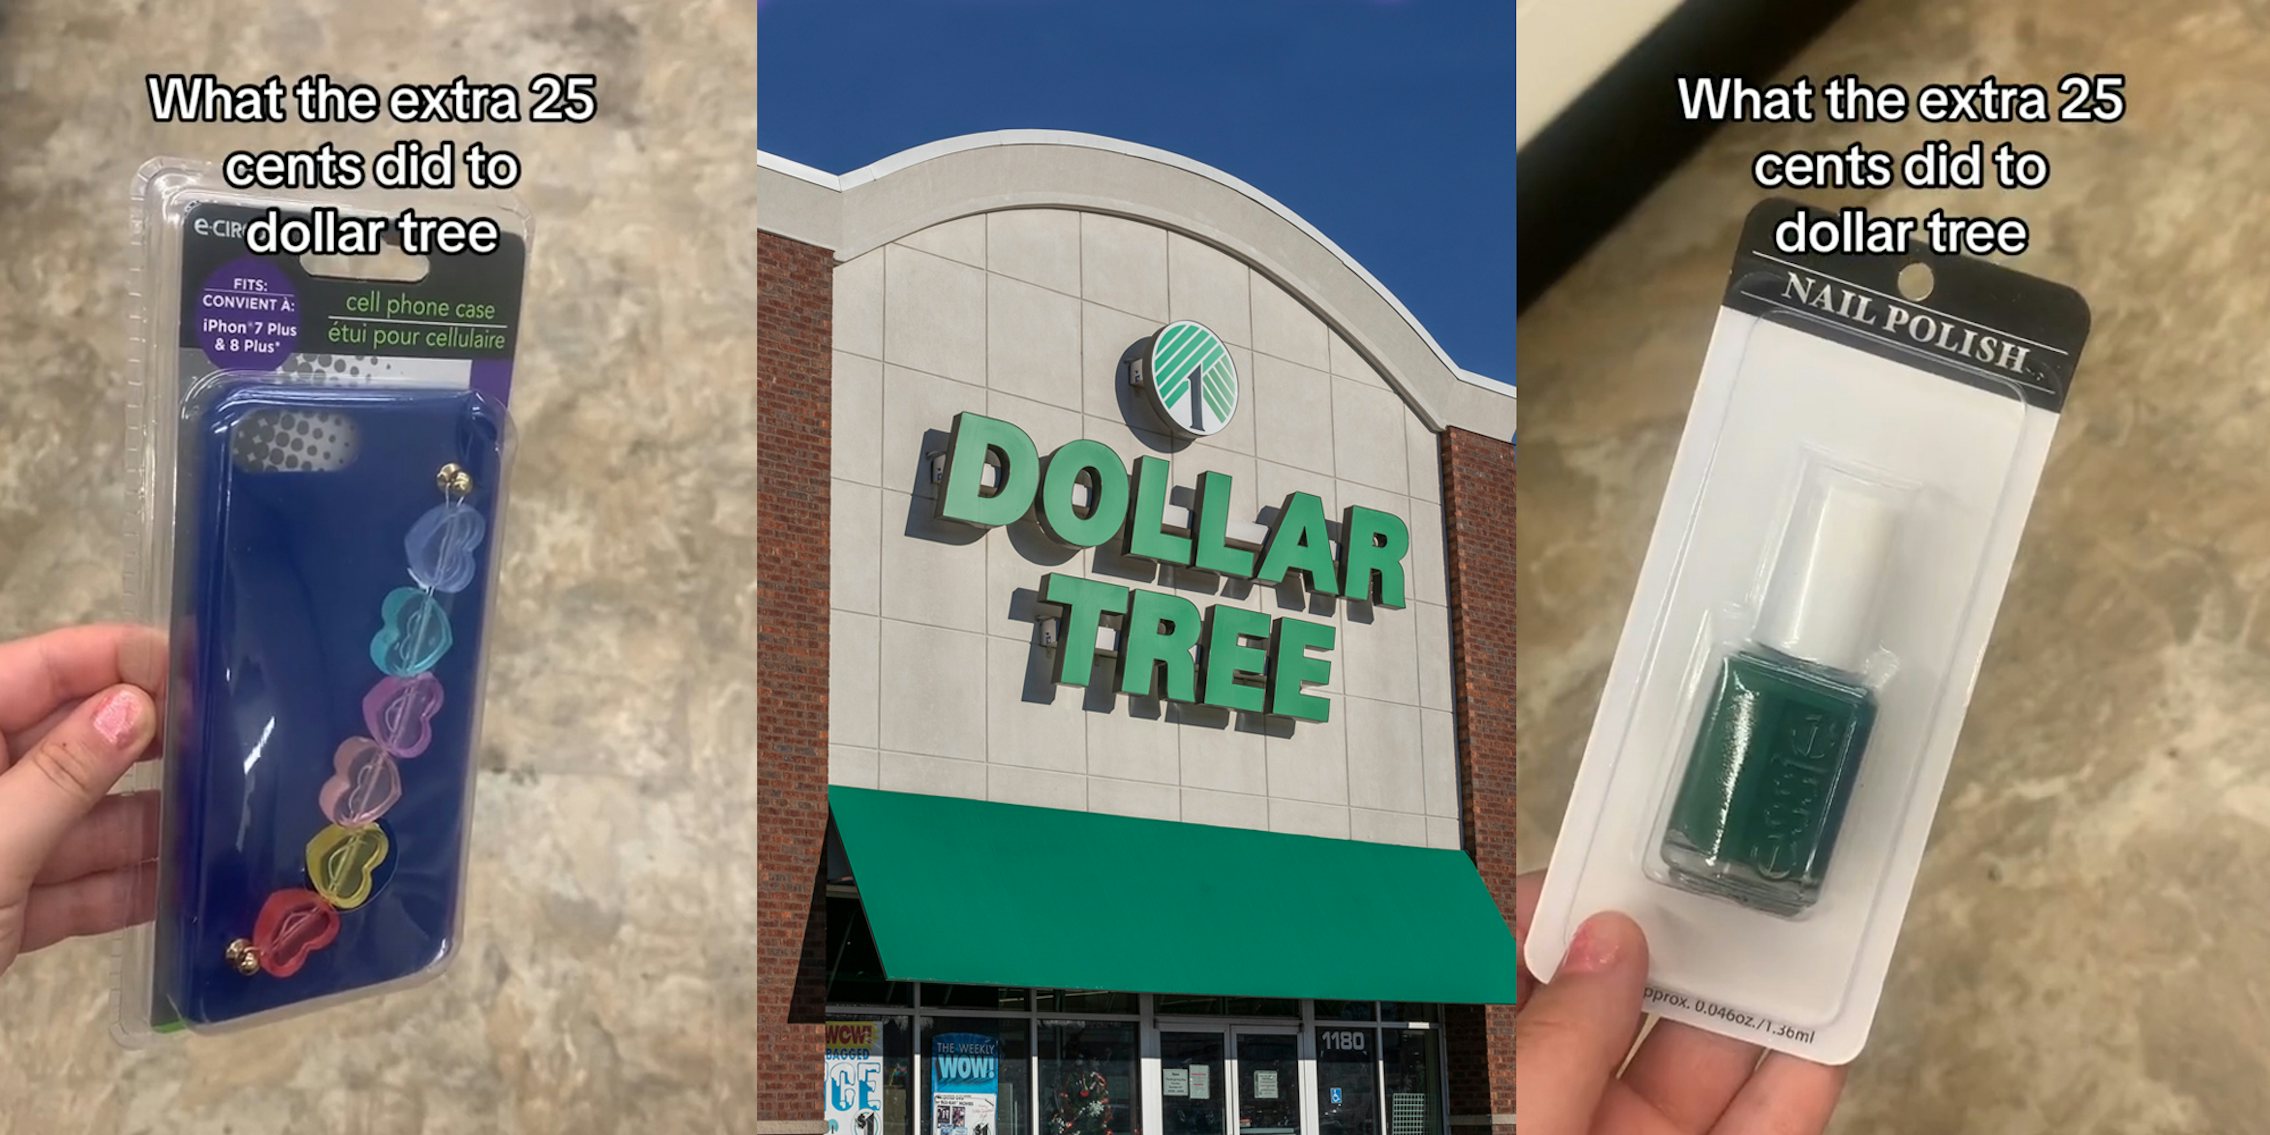 Dollar Tree customer holding phone case with caption 'What the extra 25 cents did to dollar tree' (l) Dollar Tree building with sign (c) Dollar Tree customer holding nail polish with caption 'What the extra 25 cents did to dollar tree' (r)